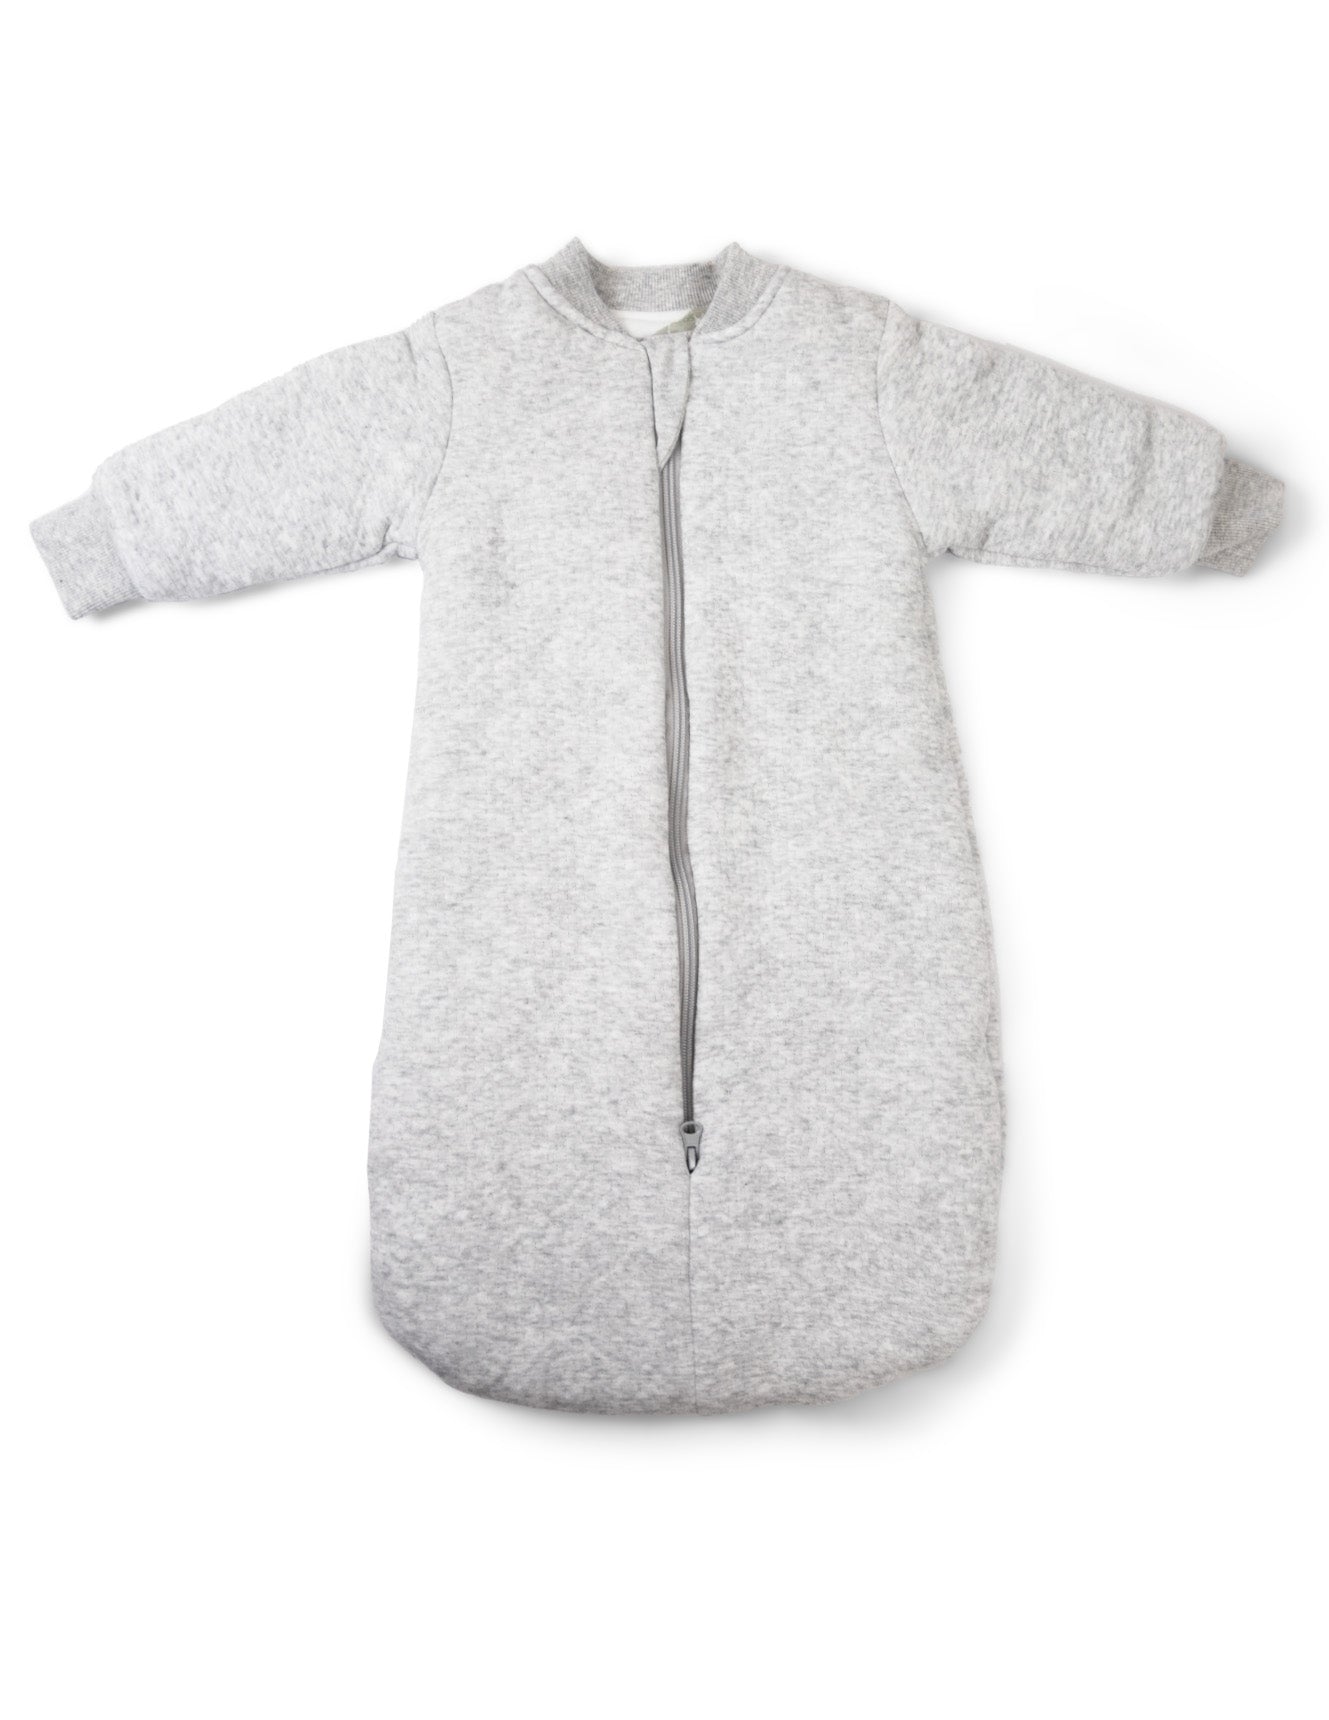 sleeping bag with arms cotton 3.0 TOG - grey marle/grey lines